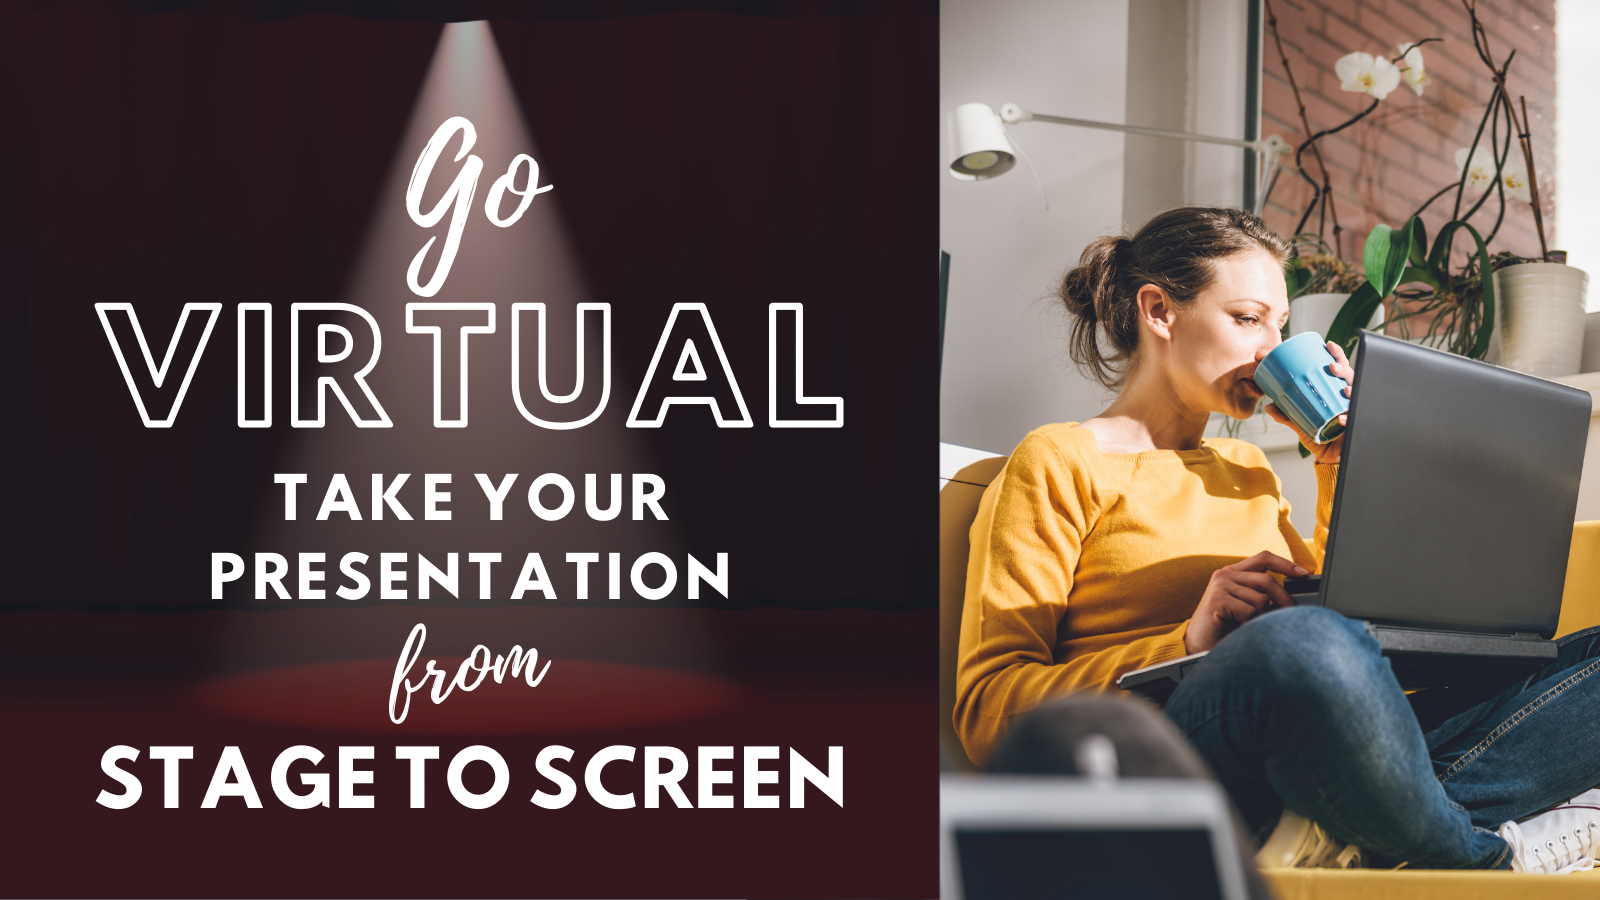 Go Virtual: Take your Presentation From Stage to Screen